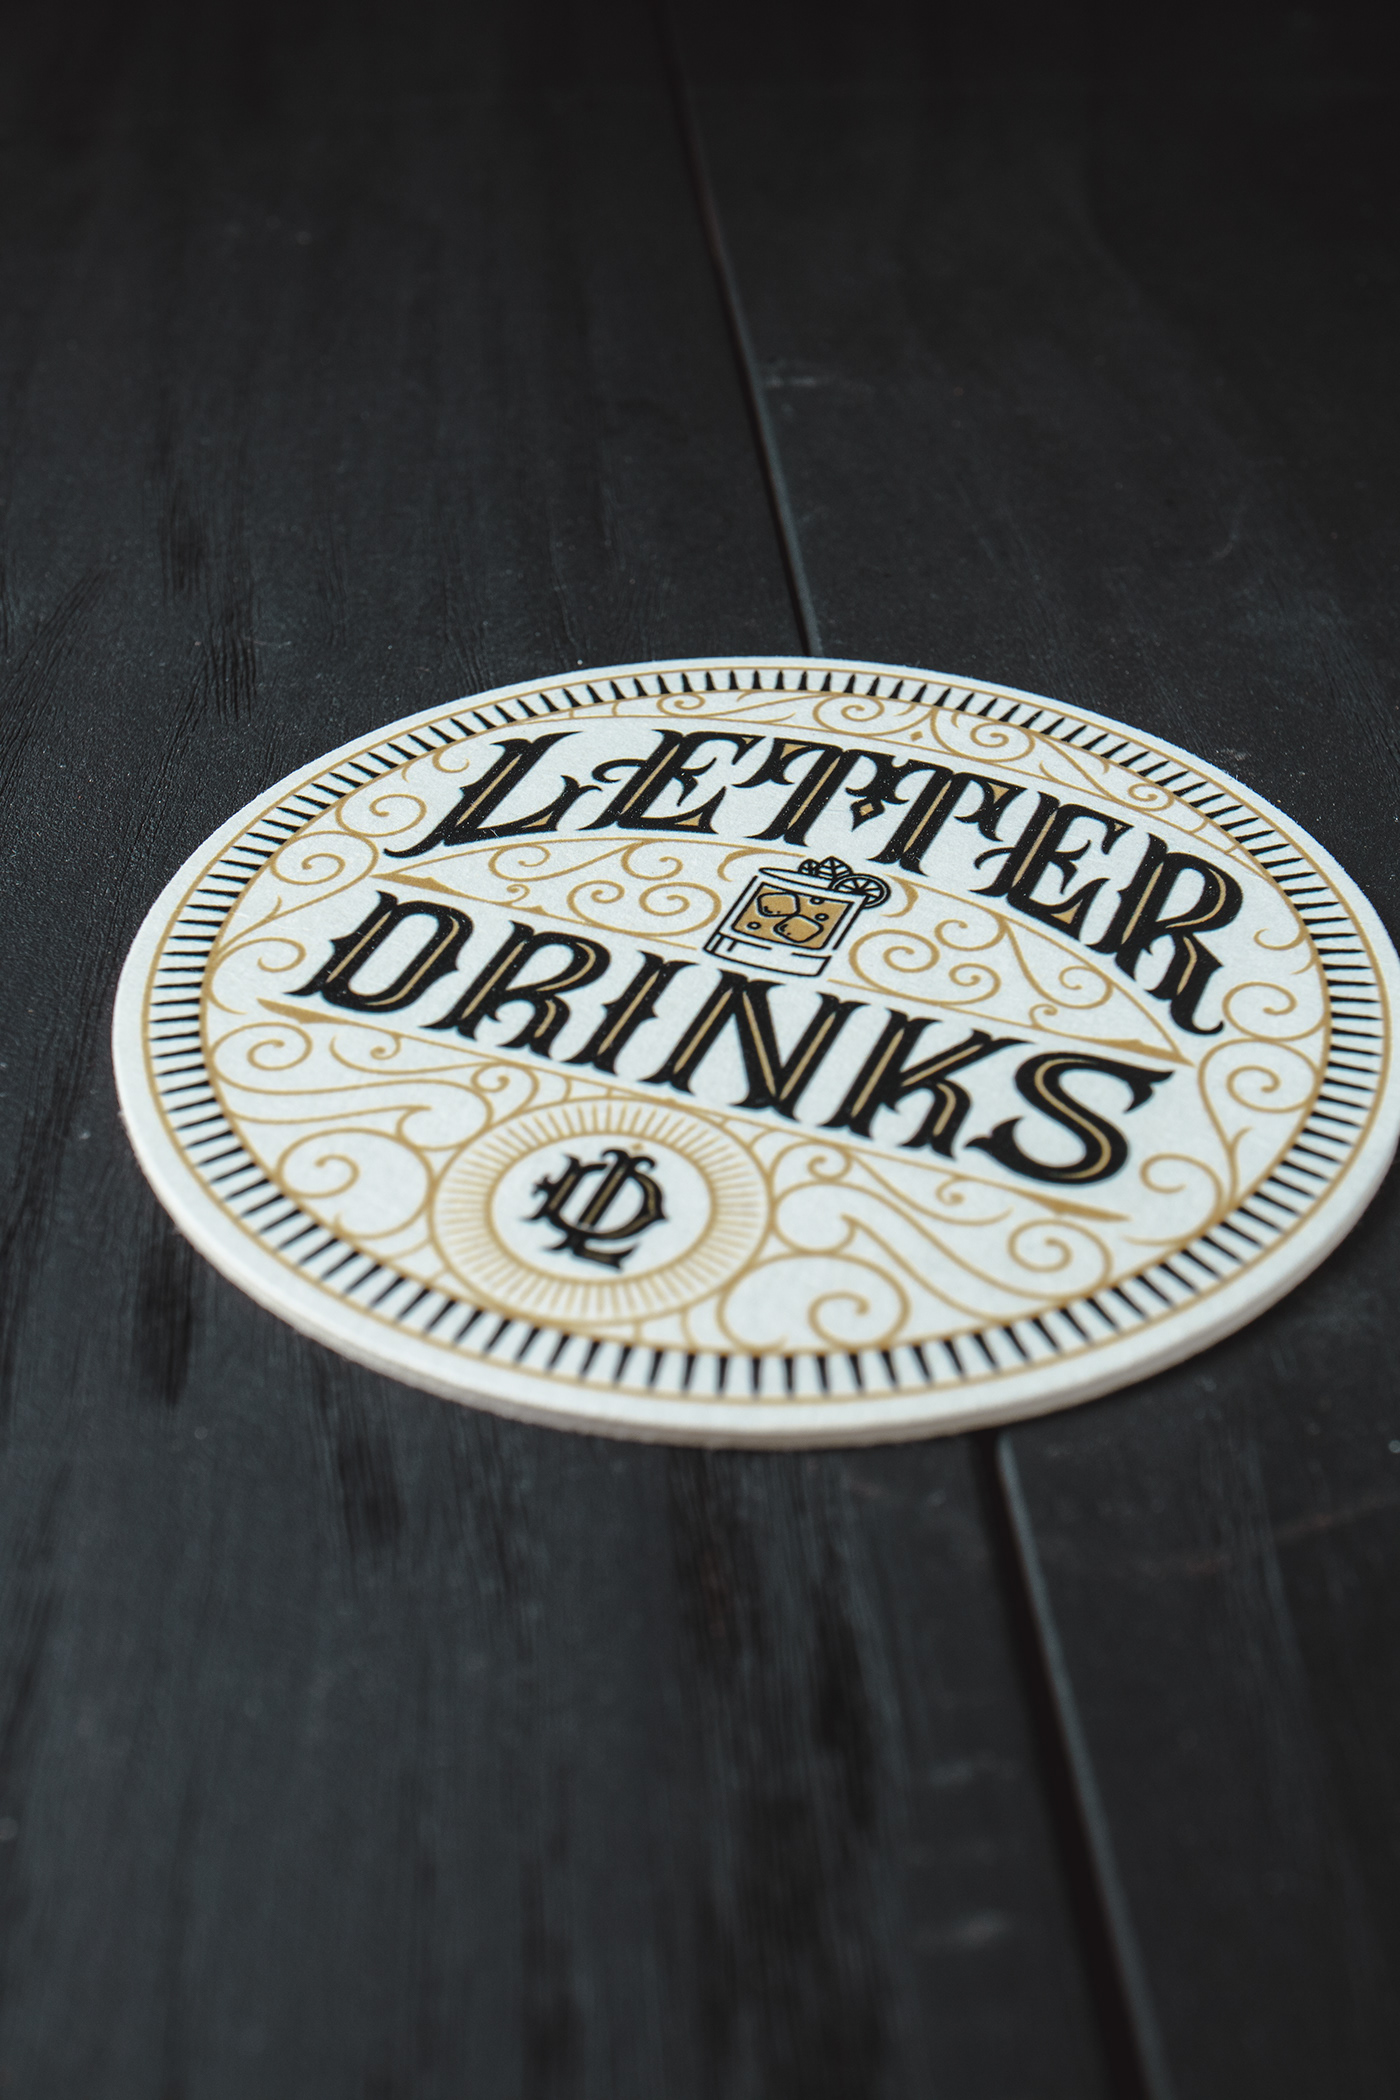 alcohol packaging branding  cocktail cocktail photography Handlettering label design lettering liquor packaging Negroni Packaging